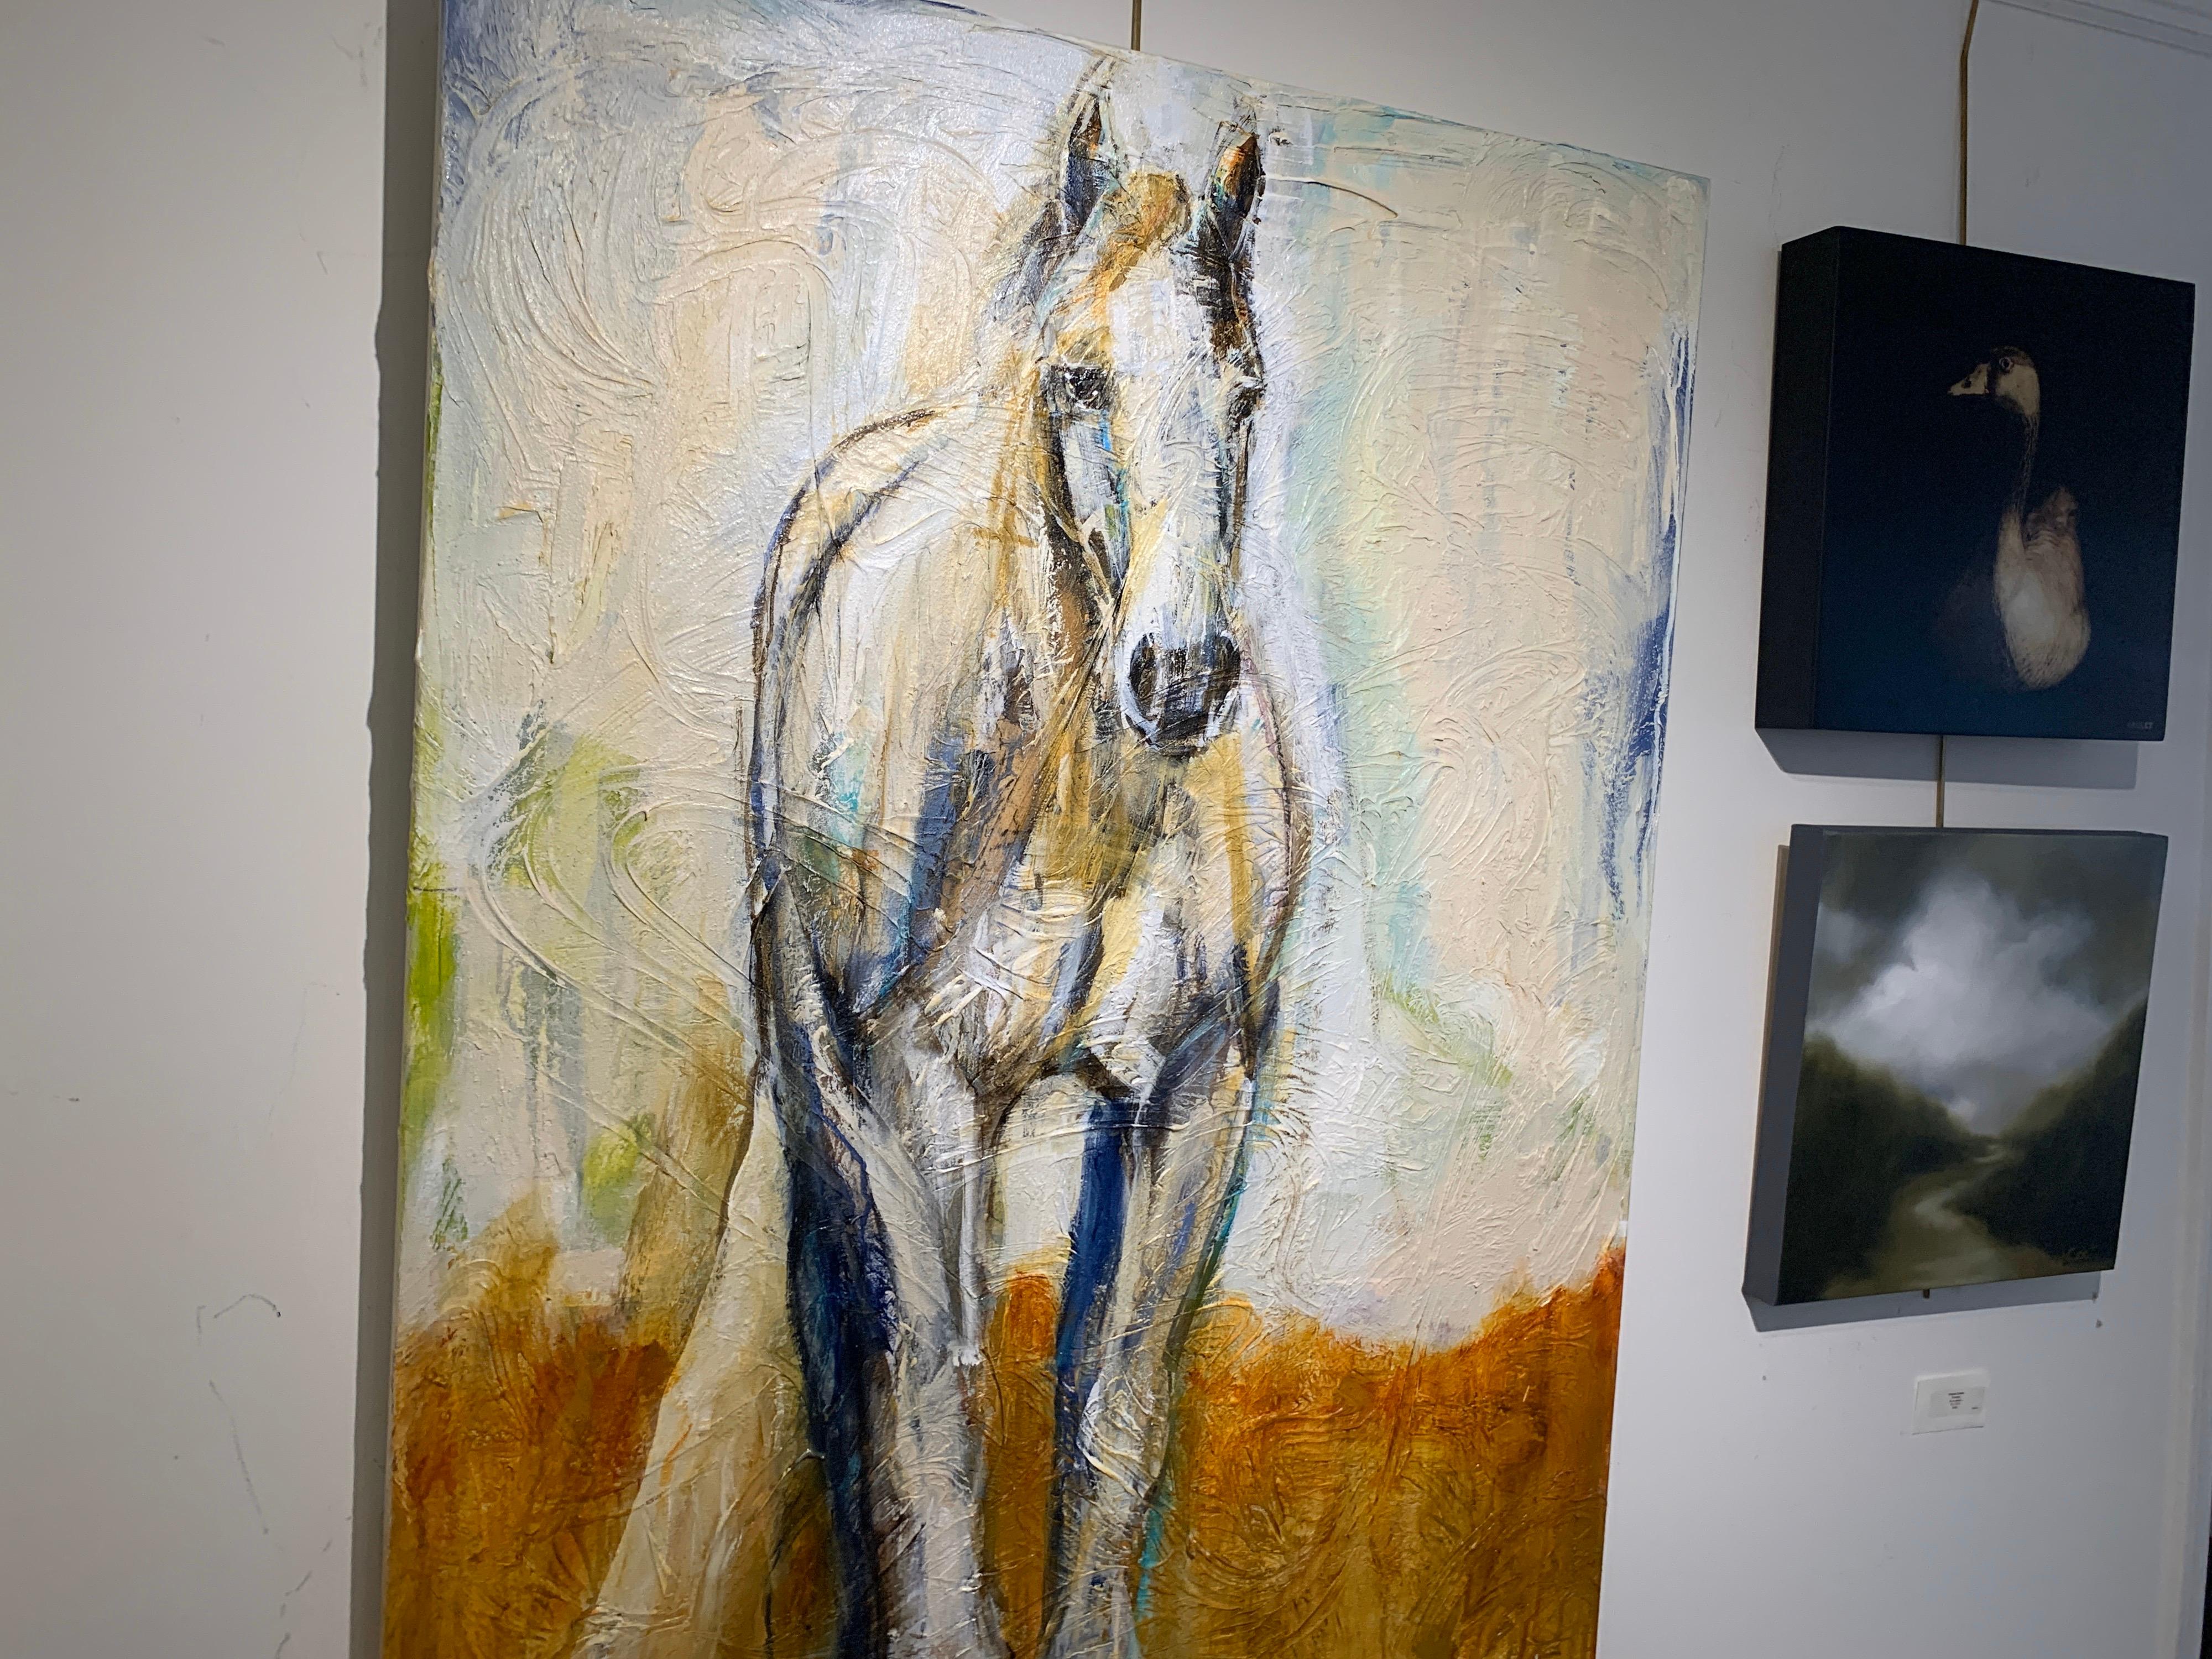 'Elle' is a large mixed media on canvas horse painting created by American artist Bonnie Beauchamp-Cooke in 2020. Featuring an elegant white horse who seems to be walking calming towards us while looking straight ahead, the piece is painted in a